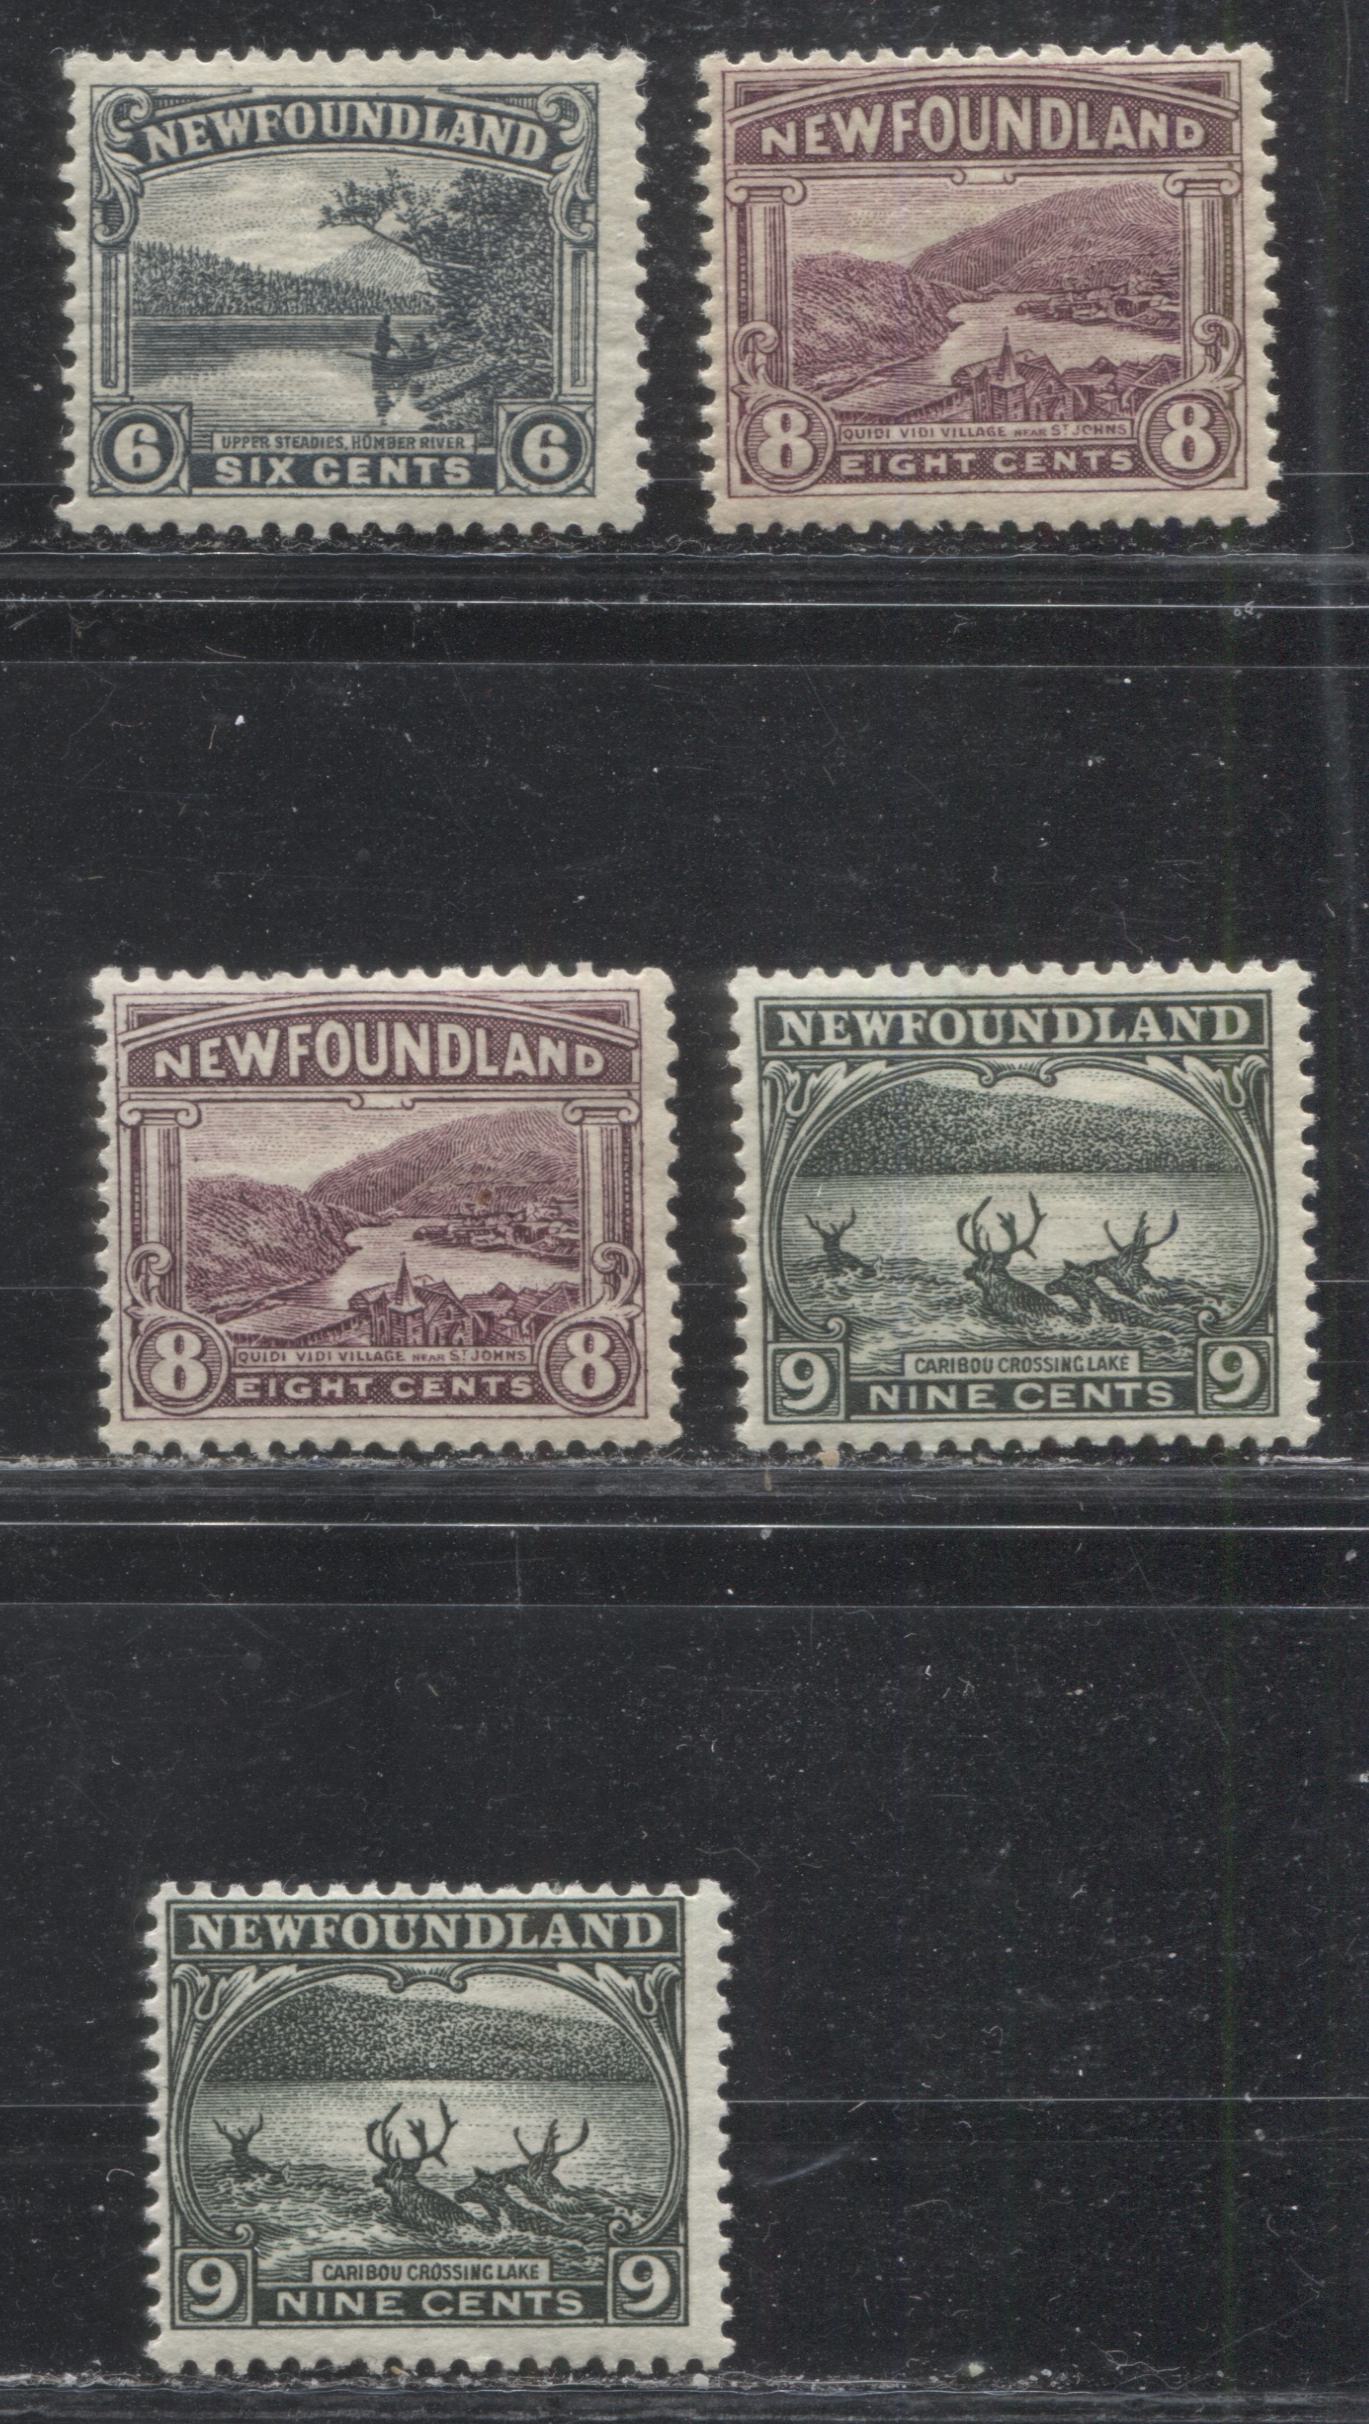 Lot 55 Newfoundland # 136-138 6c  Slate Grey - Slate Green Upper Steadies - Caribou Crossing Lake, 1923-1928 Pictorial Issue, Five Fine OG Examples, Various Comb Perfs